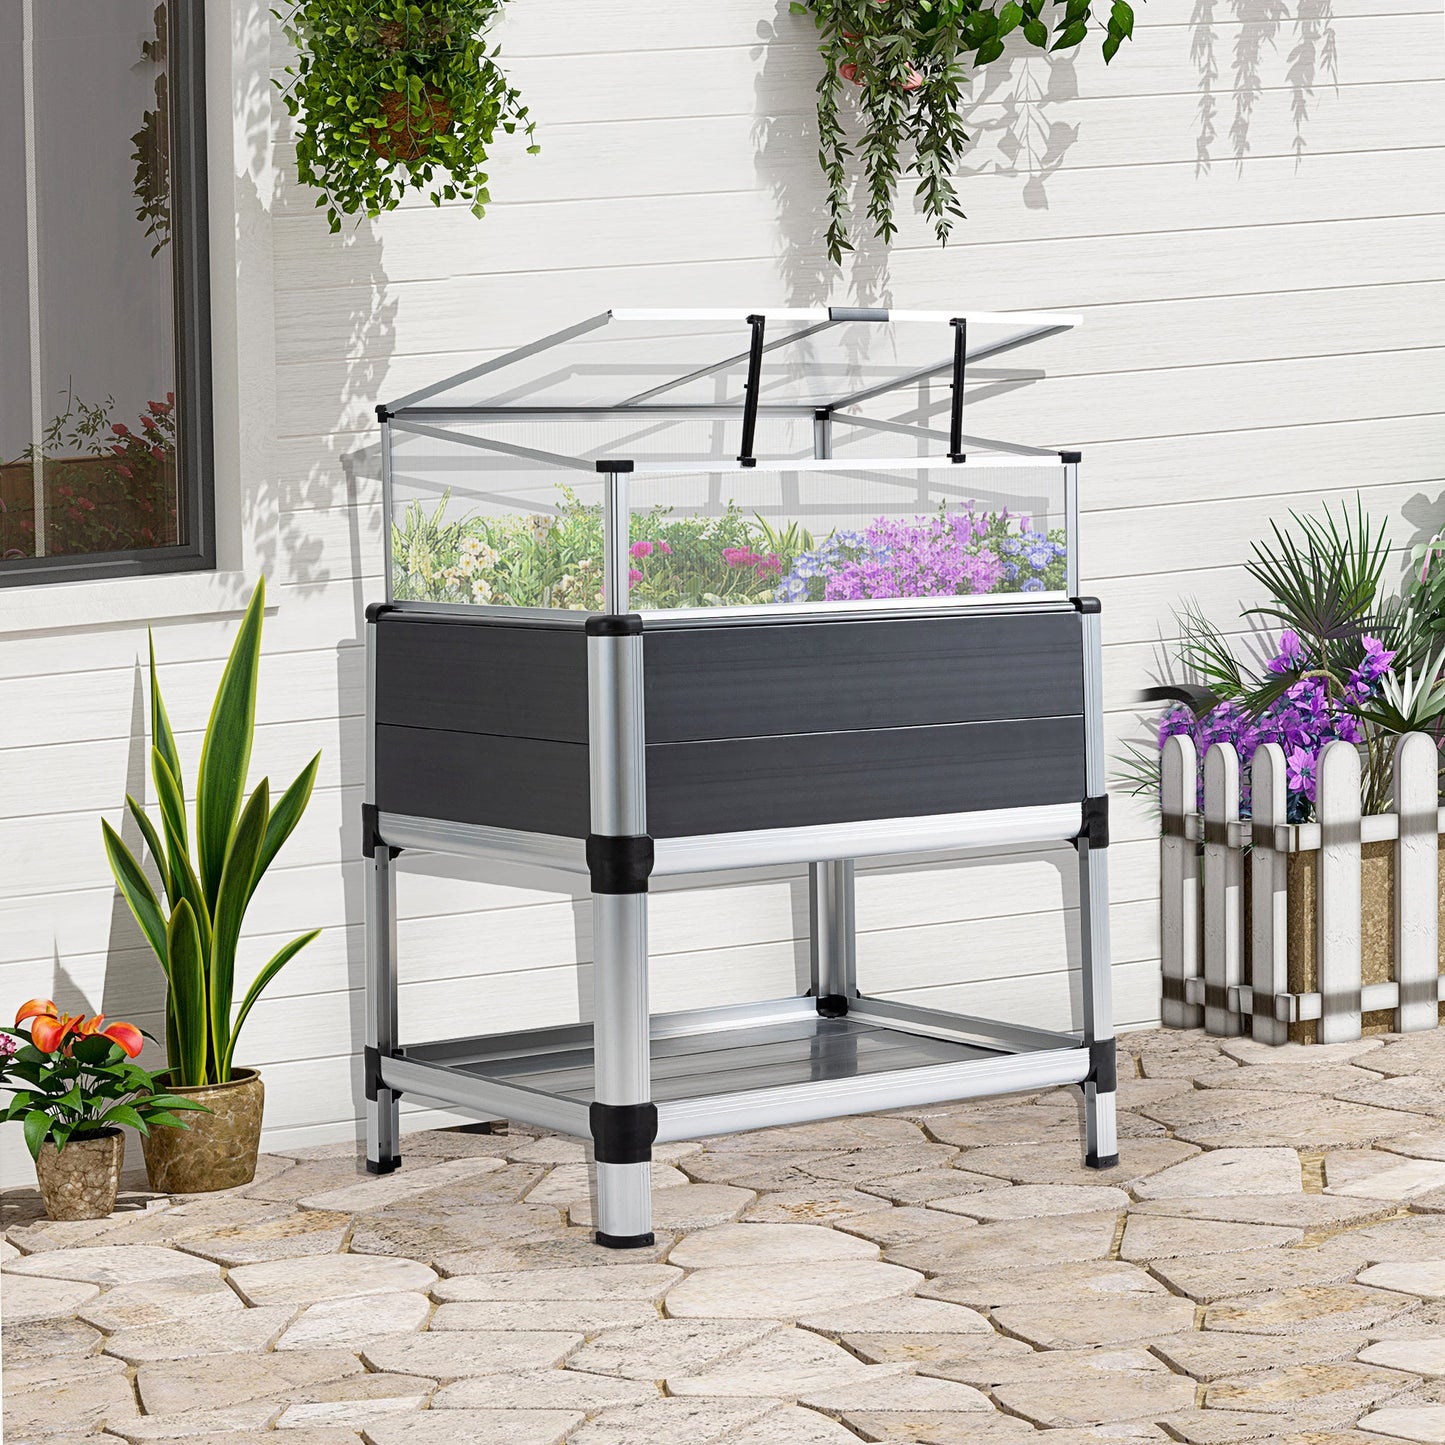 Raised Garden Bed with Cold Frame Greenhouse and Storage Shelf, Aluminum &; PVC Elevated Planter Box for Herbs and Vegetables, Use for Patio, Backyard, Balcony - Gallery Canada